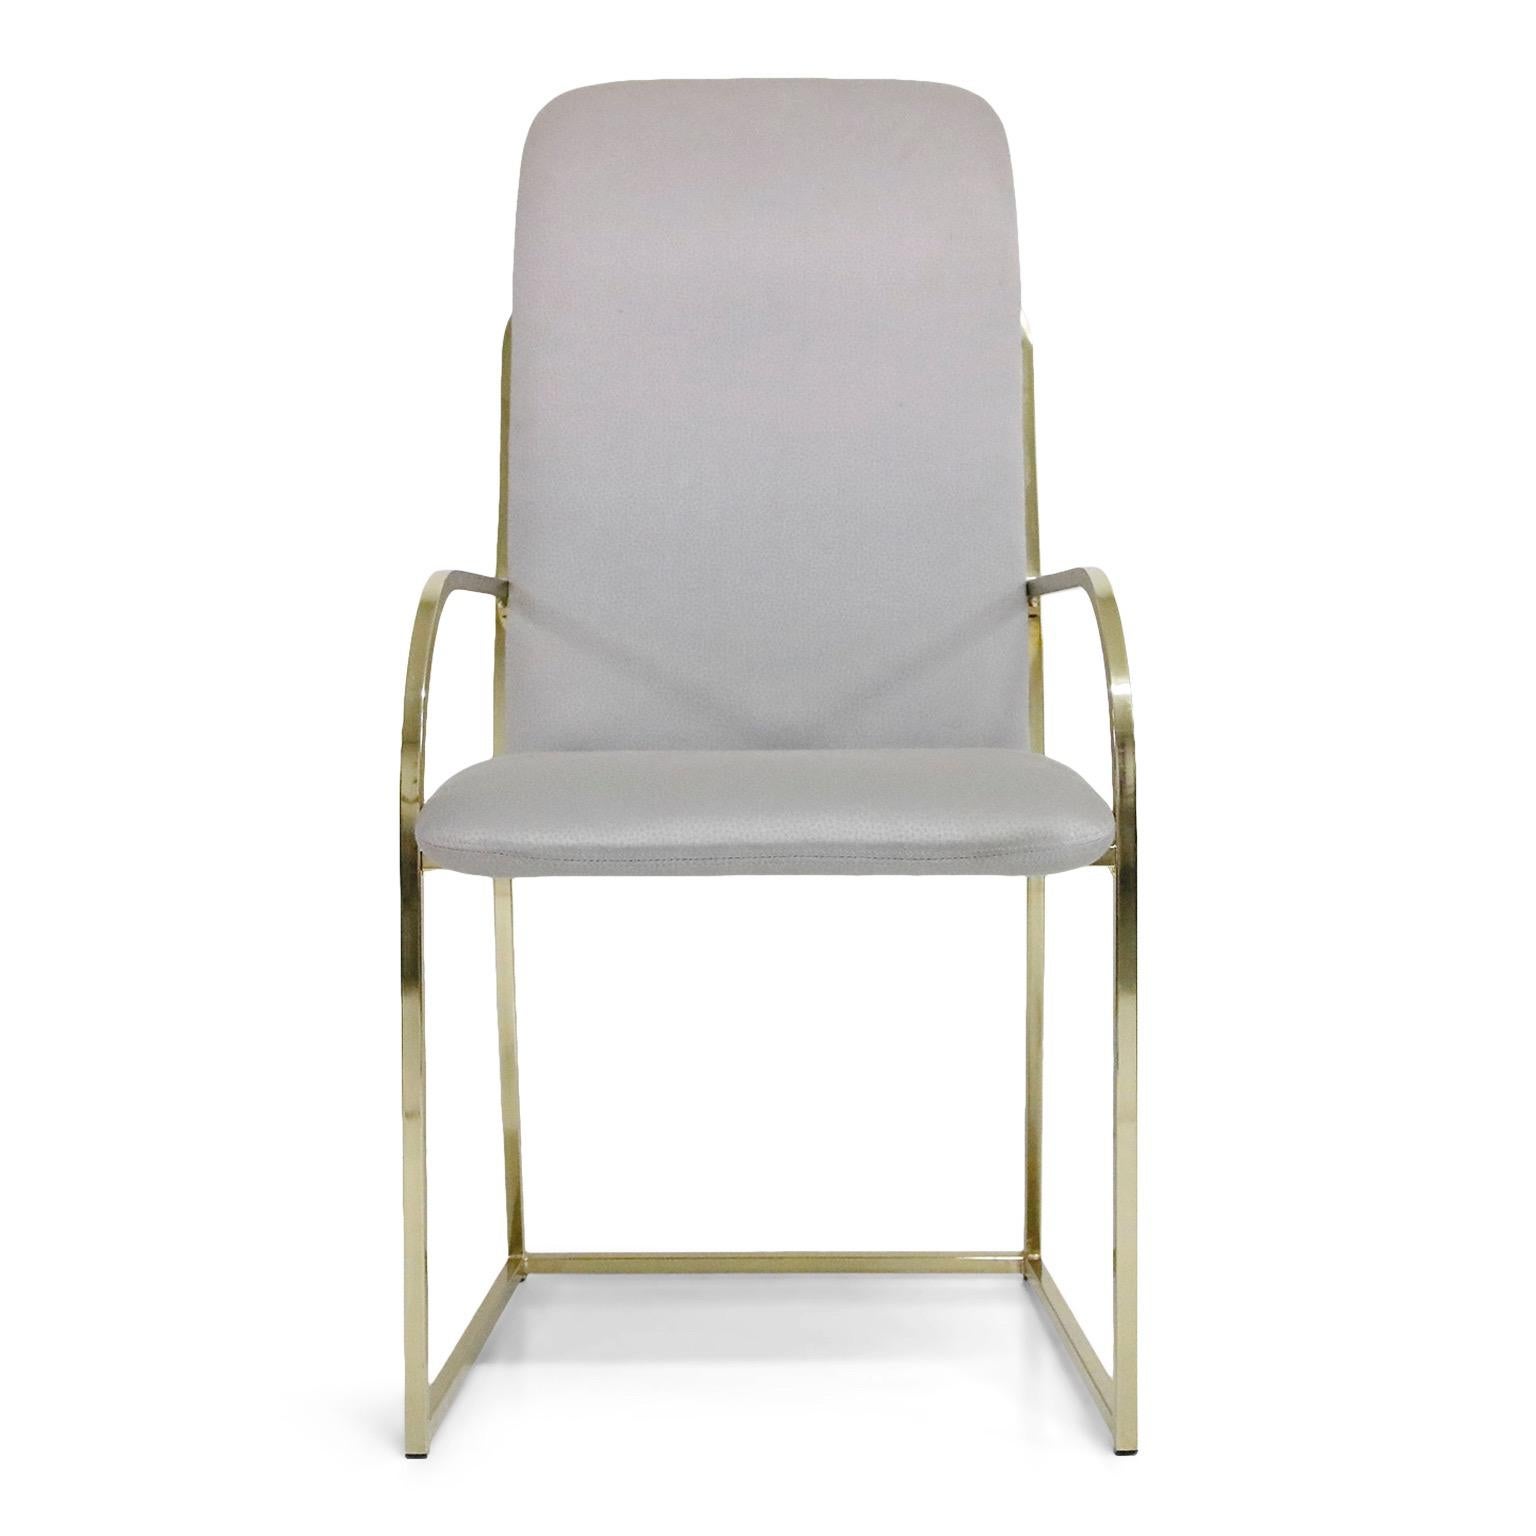 This set of six (6) brass dining chairs are by Design Institute America and labelled underneath each chair. Two (2) captains armchairs and four (4) side chairs. Nice bright and clean brass with sculptural lines make this set an excellent candidate